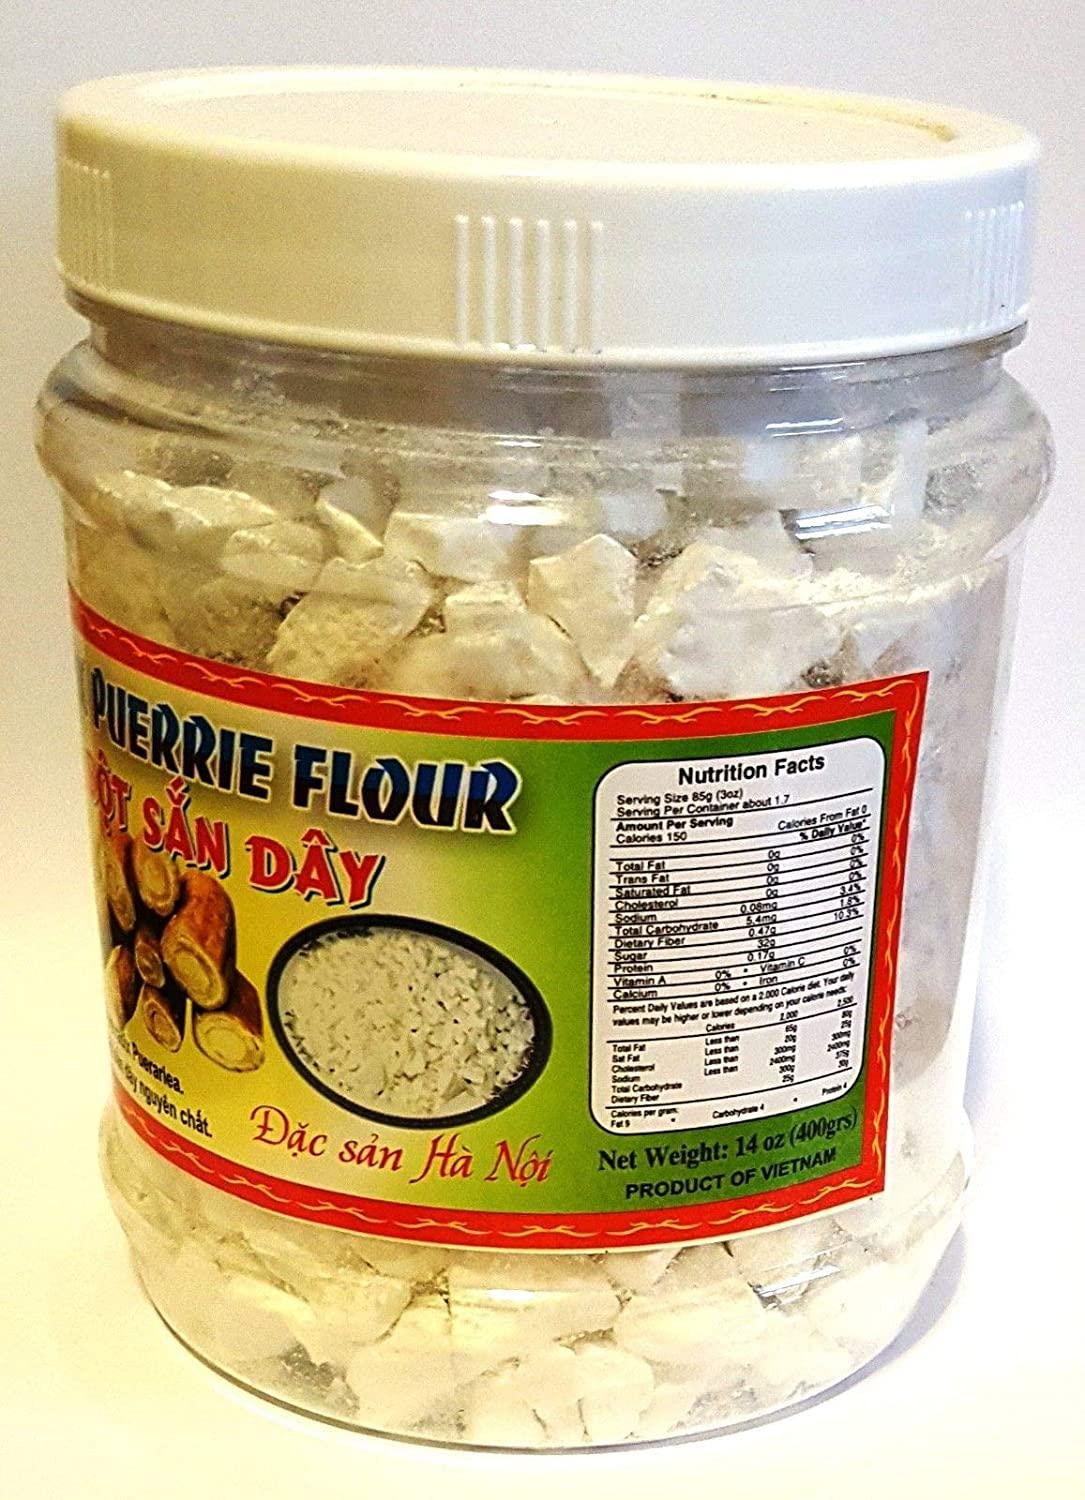 Arrowroot Starch Powder Bot San Day Radix Puerrie Flour 14 oz - Pack of 1